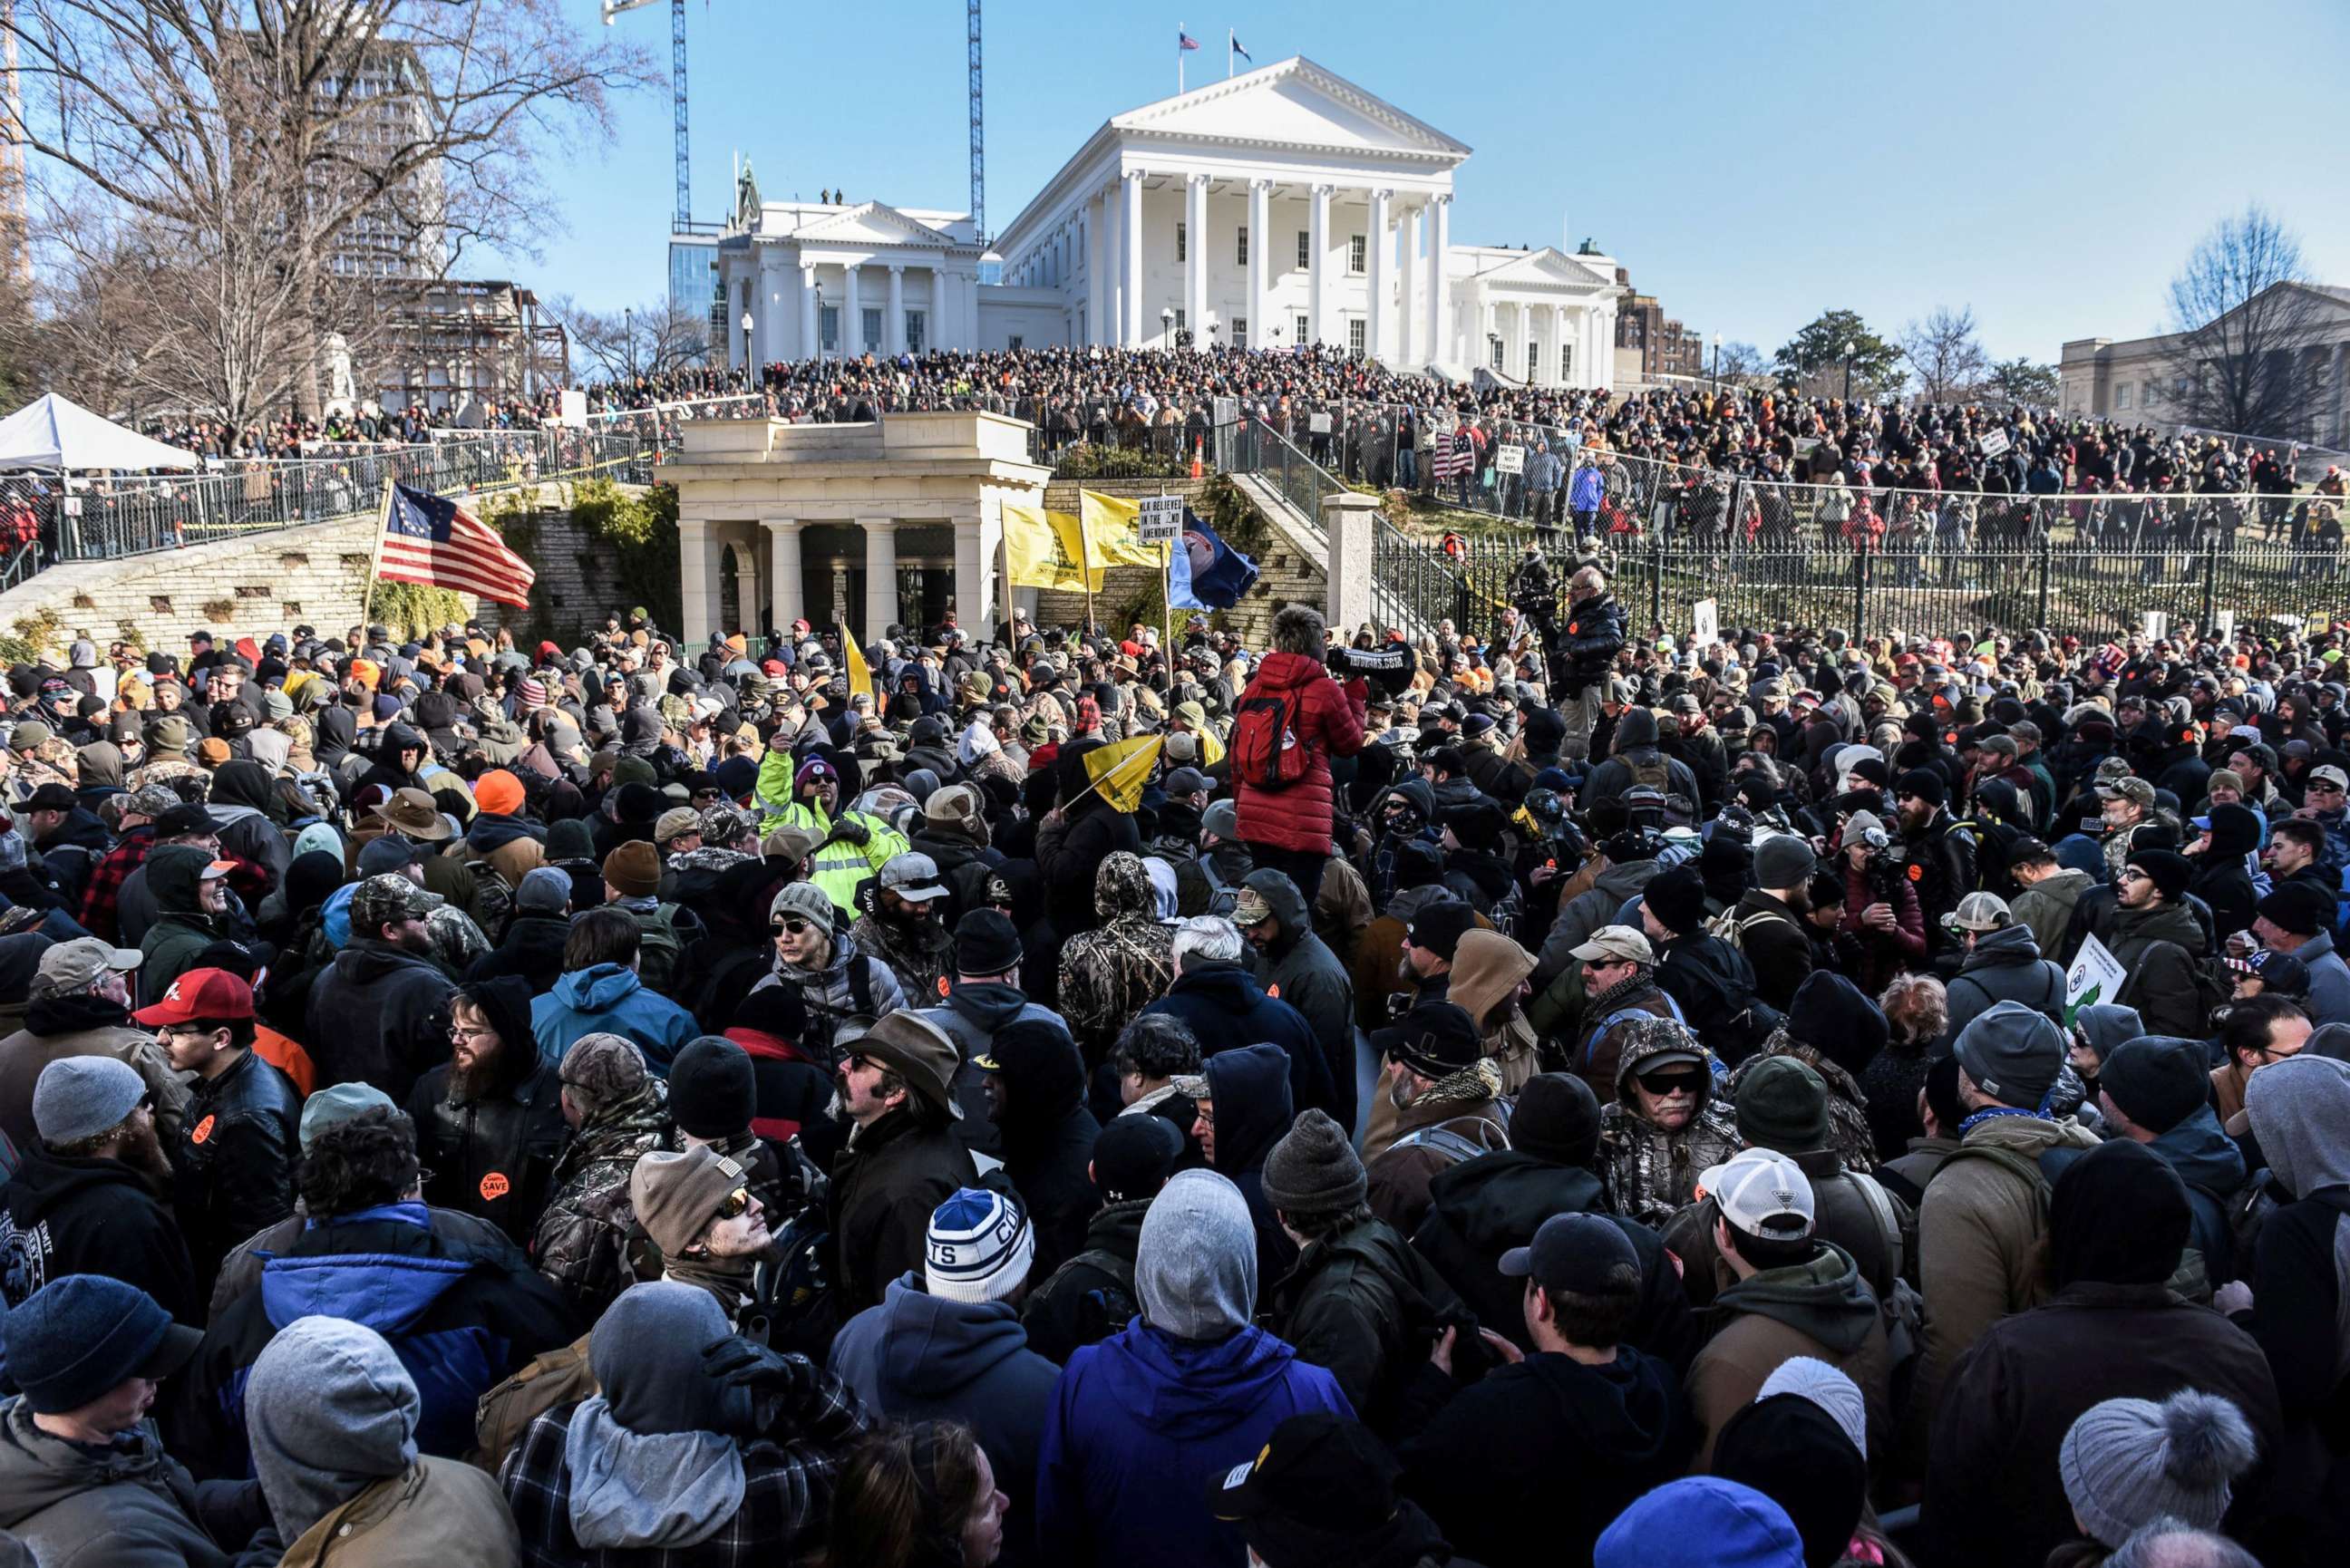 PHOTO: A large crowd gathers on a Gun Lobby Day in front of the Virginia State Capitol building in Richmond, VA, Jan. 20, 2020.